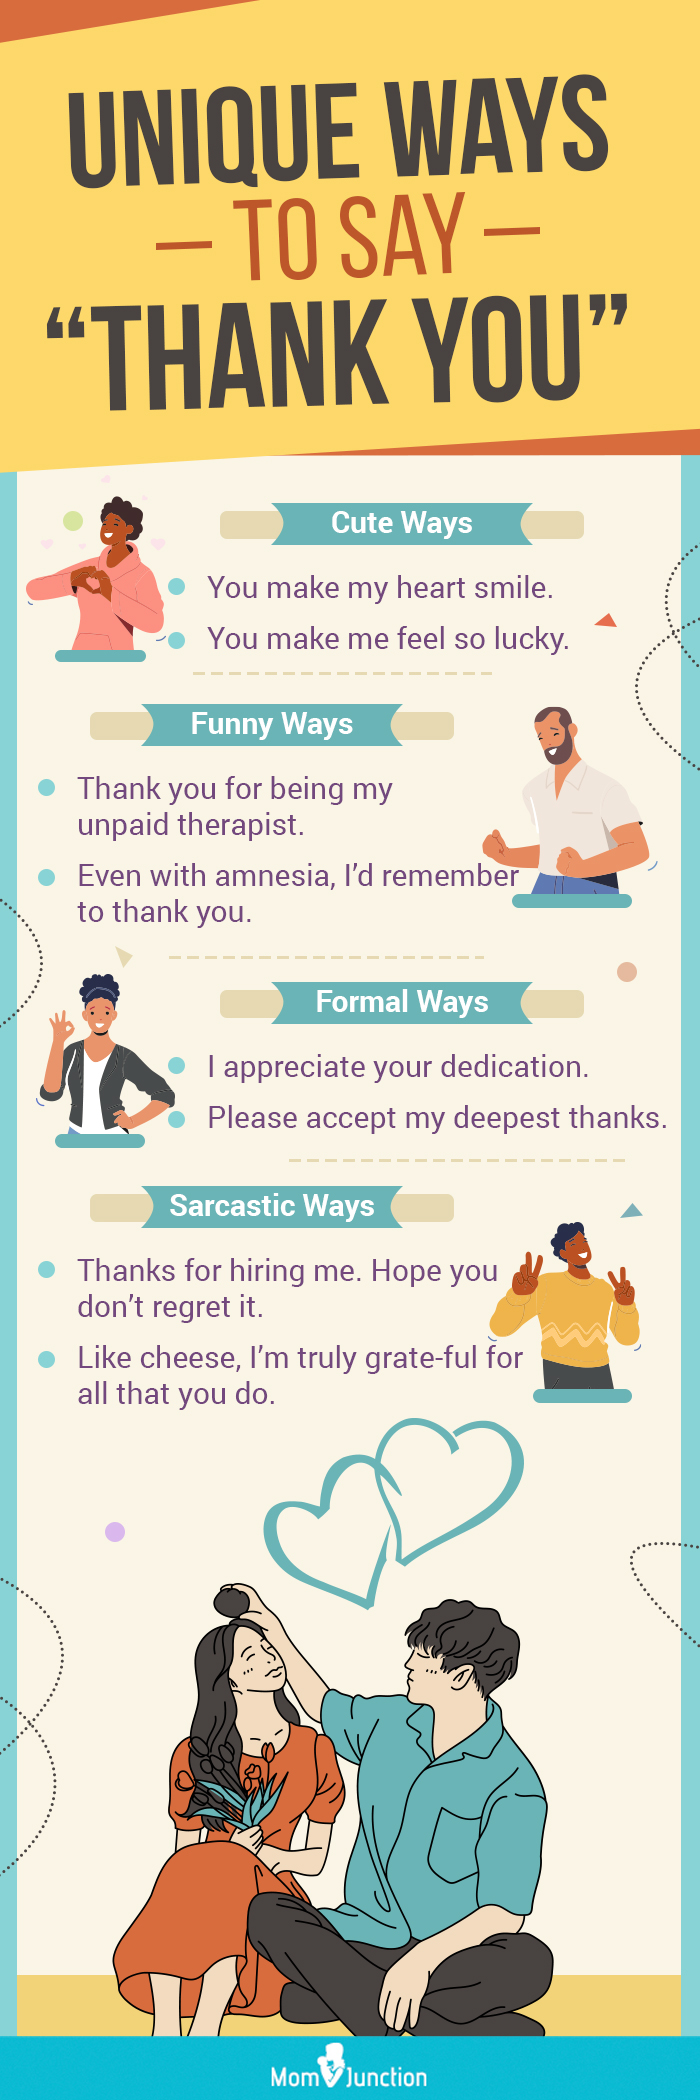 15 Other Ways To Say Thank You: Formal & Casual Synonyms